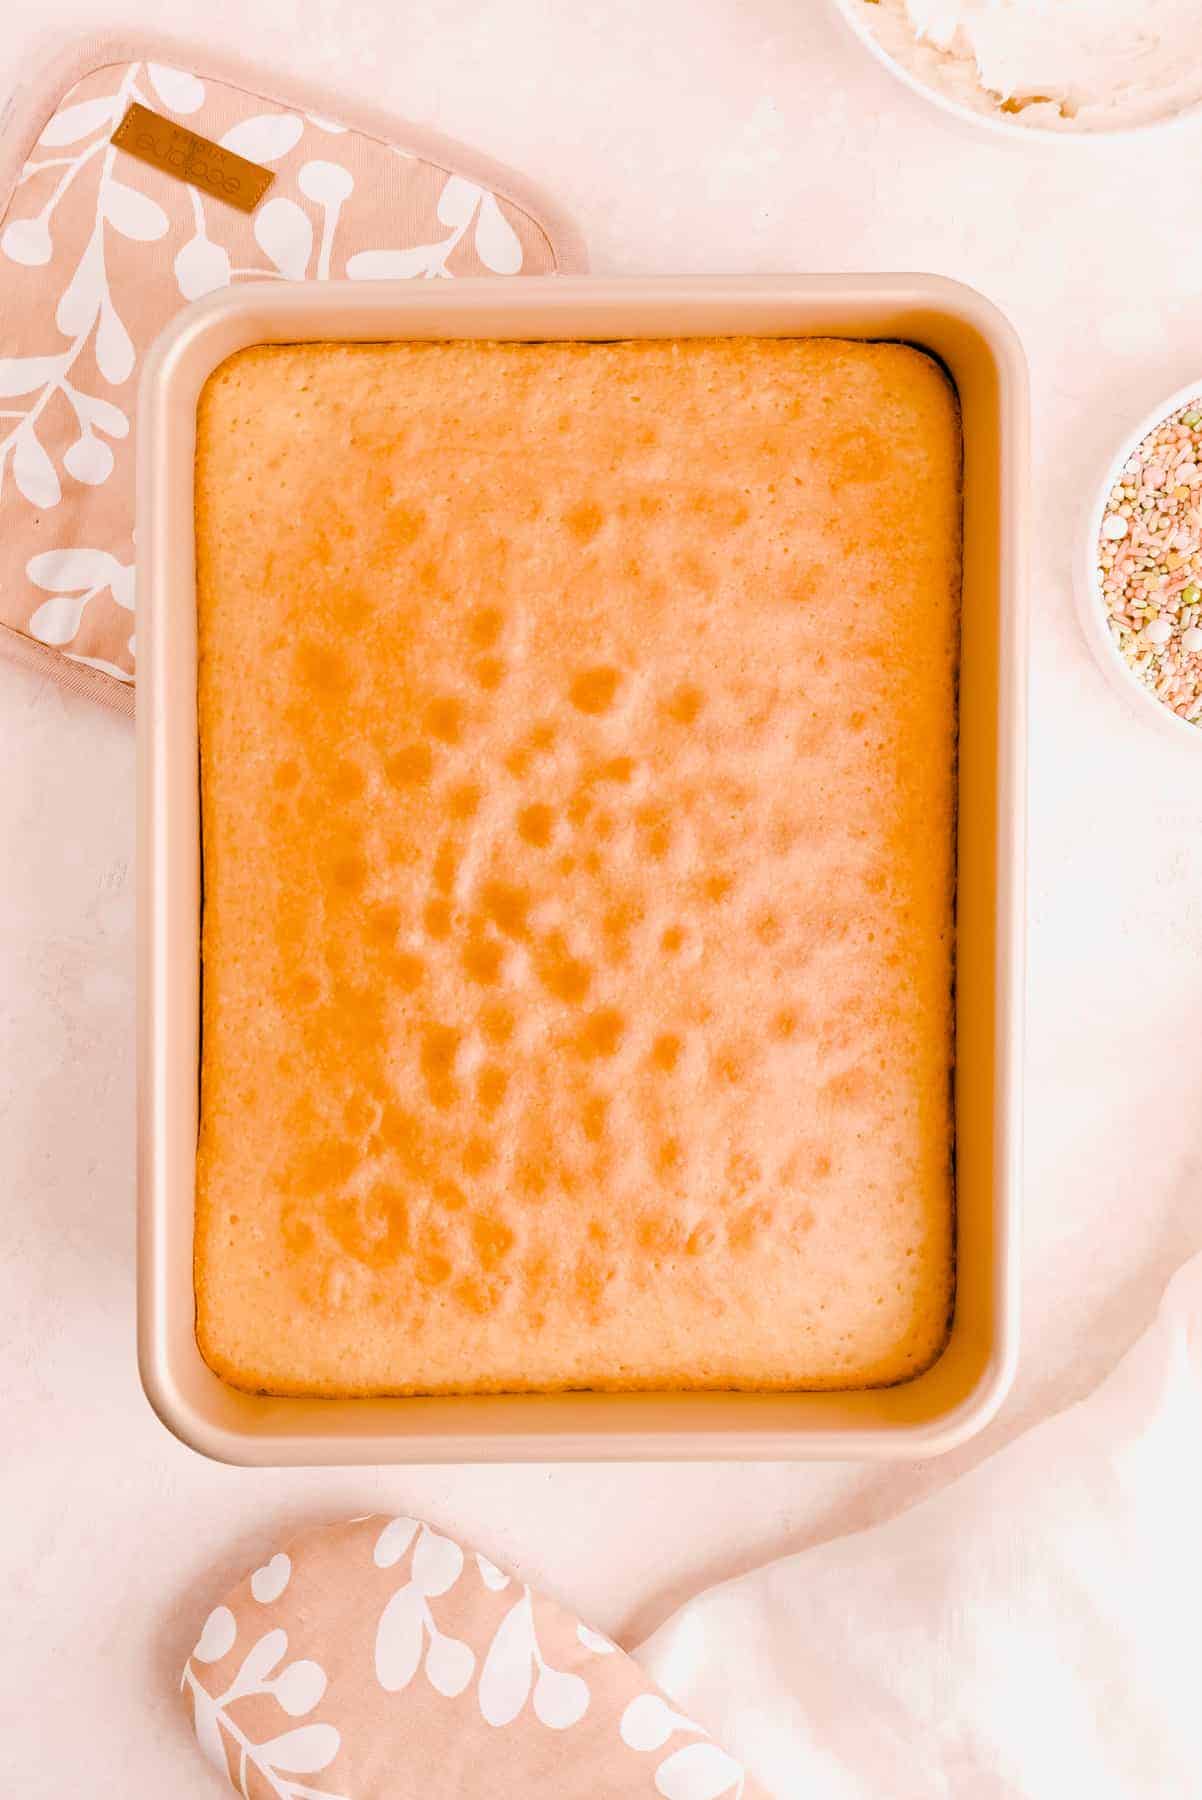 easy vanilla sheet cake in a 9" x 13" pan with an oven mitt, bowl of vanilla frosting and bowl of sprinkles